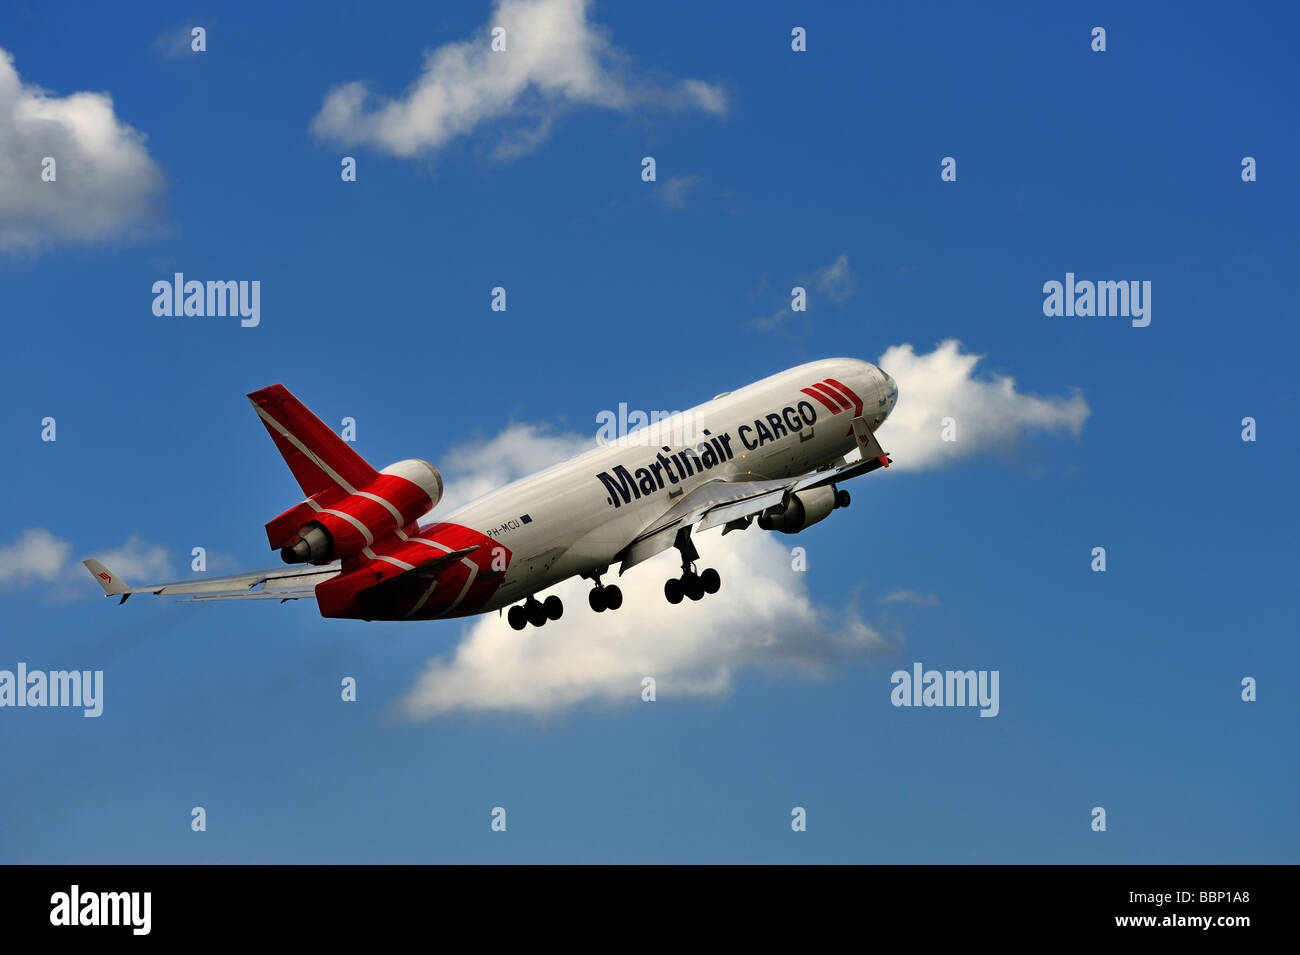 Martinair Cargo plane on take off Amsterdam airport The Netherlands Stock Photo